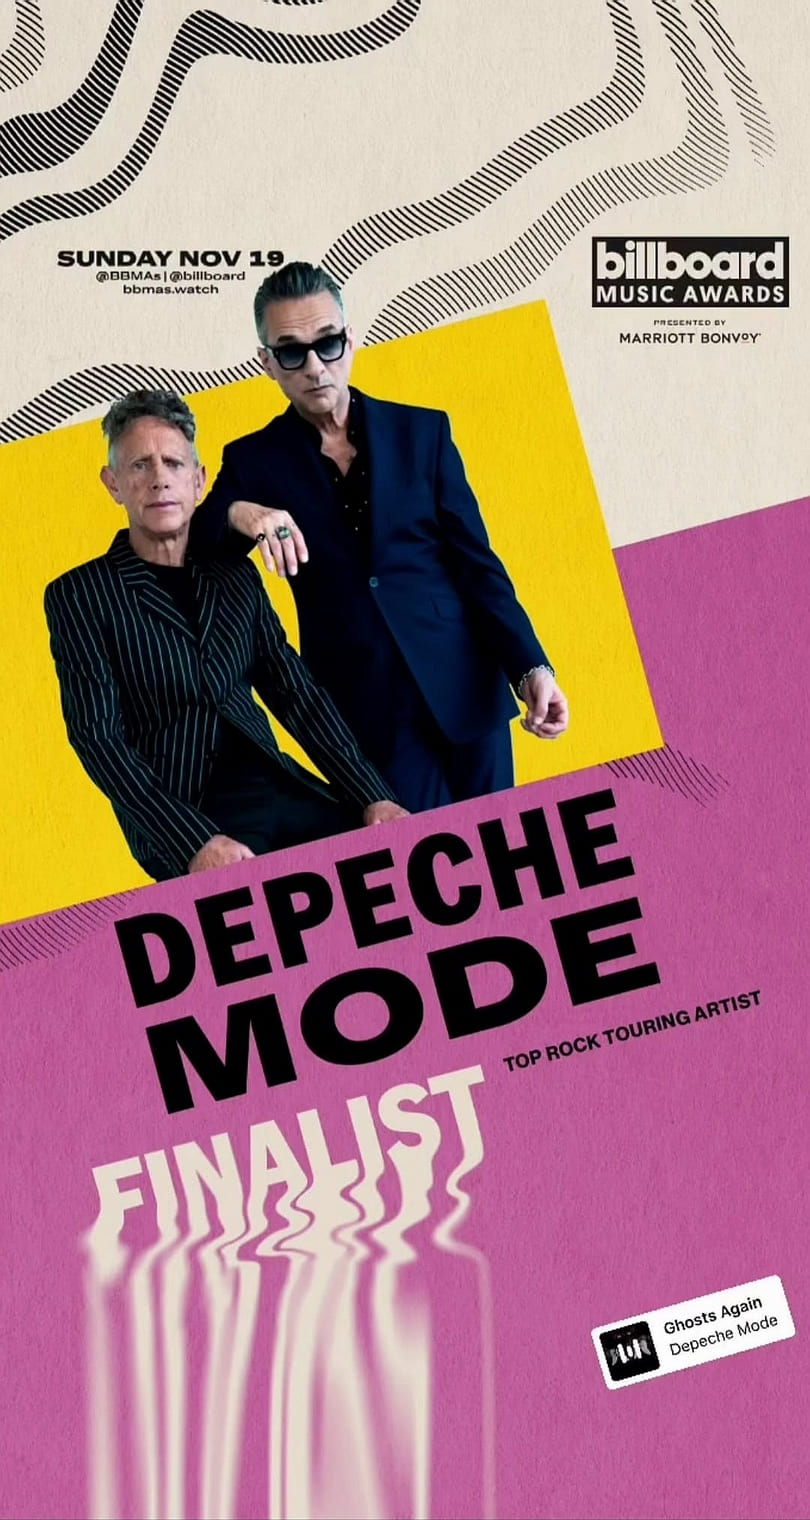 DEPECHE MODE UK group with members Martin Gore at left and Andy